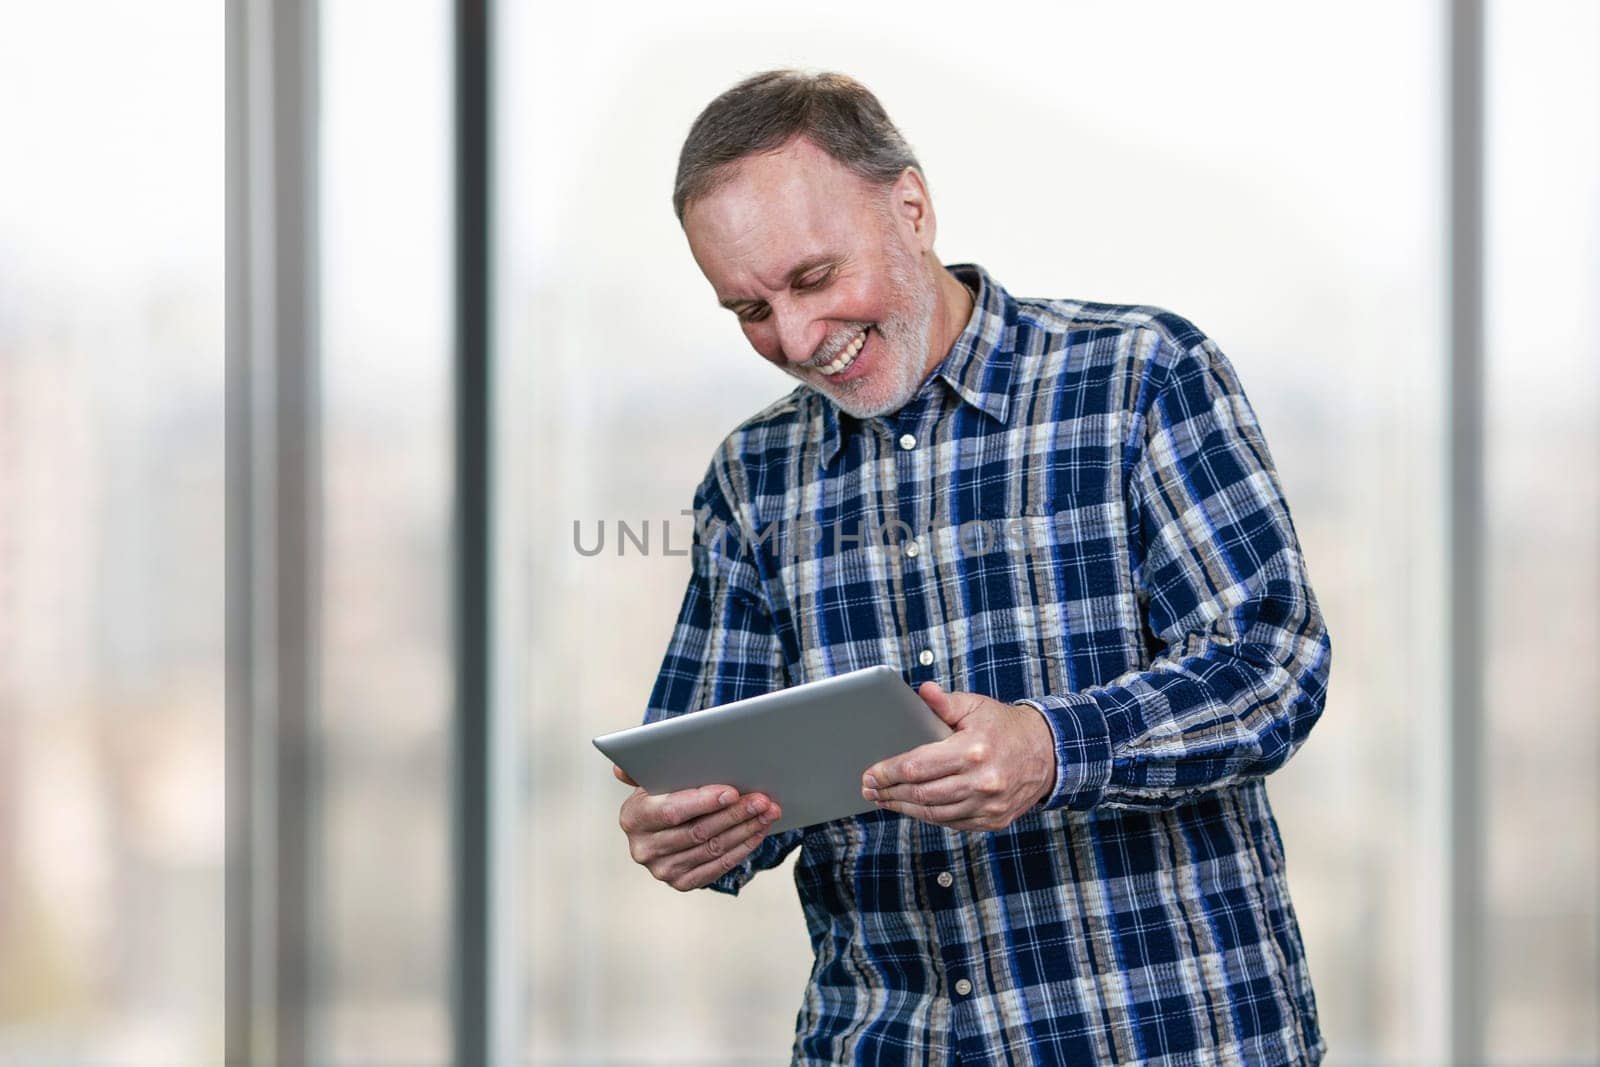 Smiling mature man holding tablet pc in both hands. Huge office windows background.